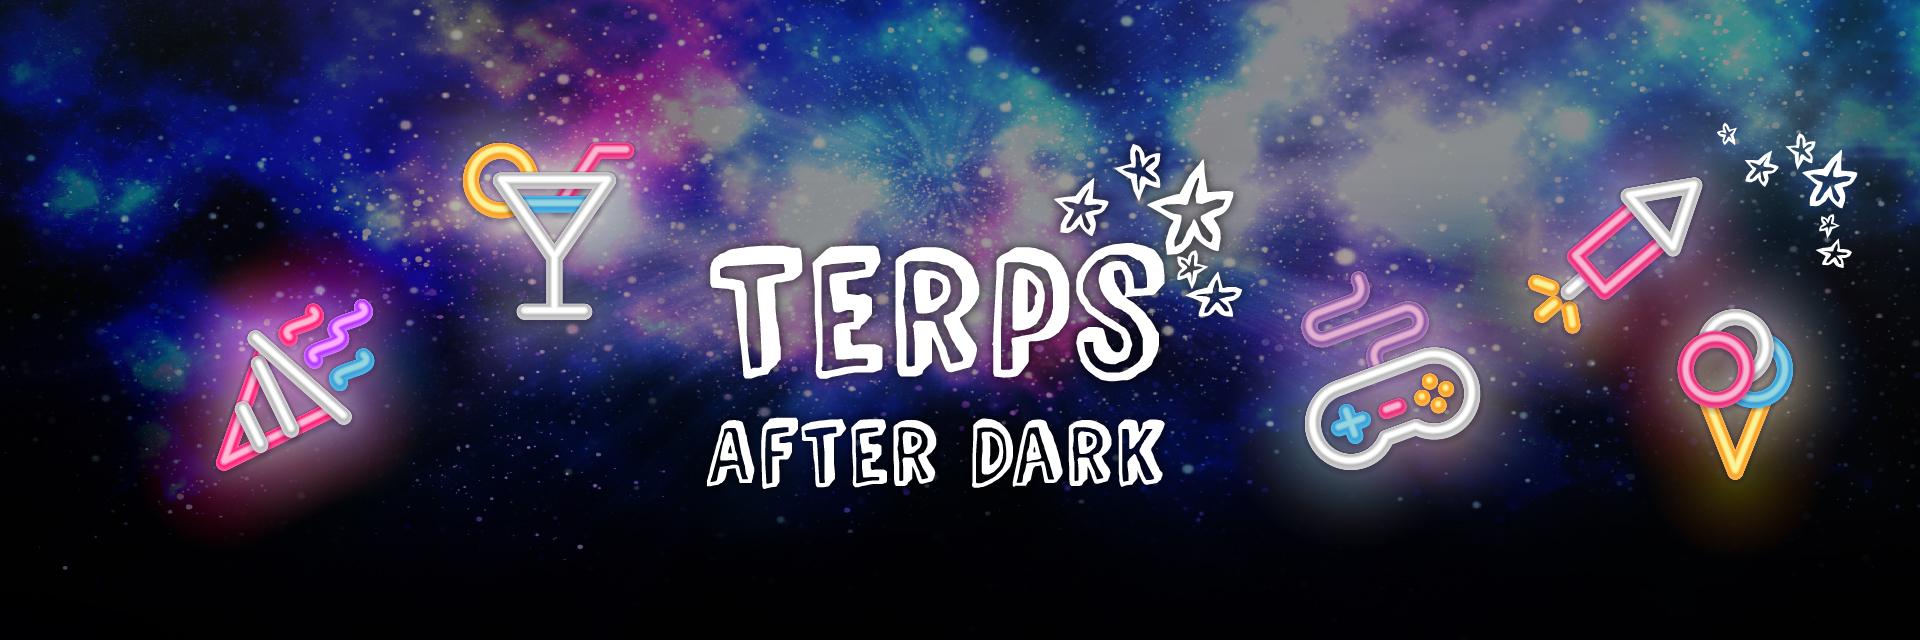 Stay up late with UMD at Terps After Dark